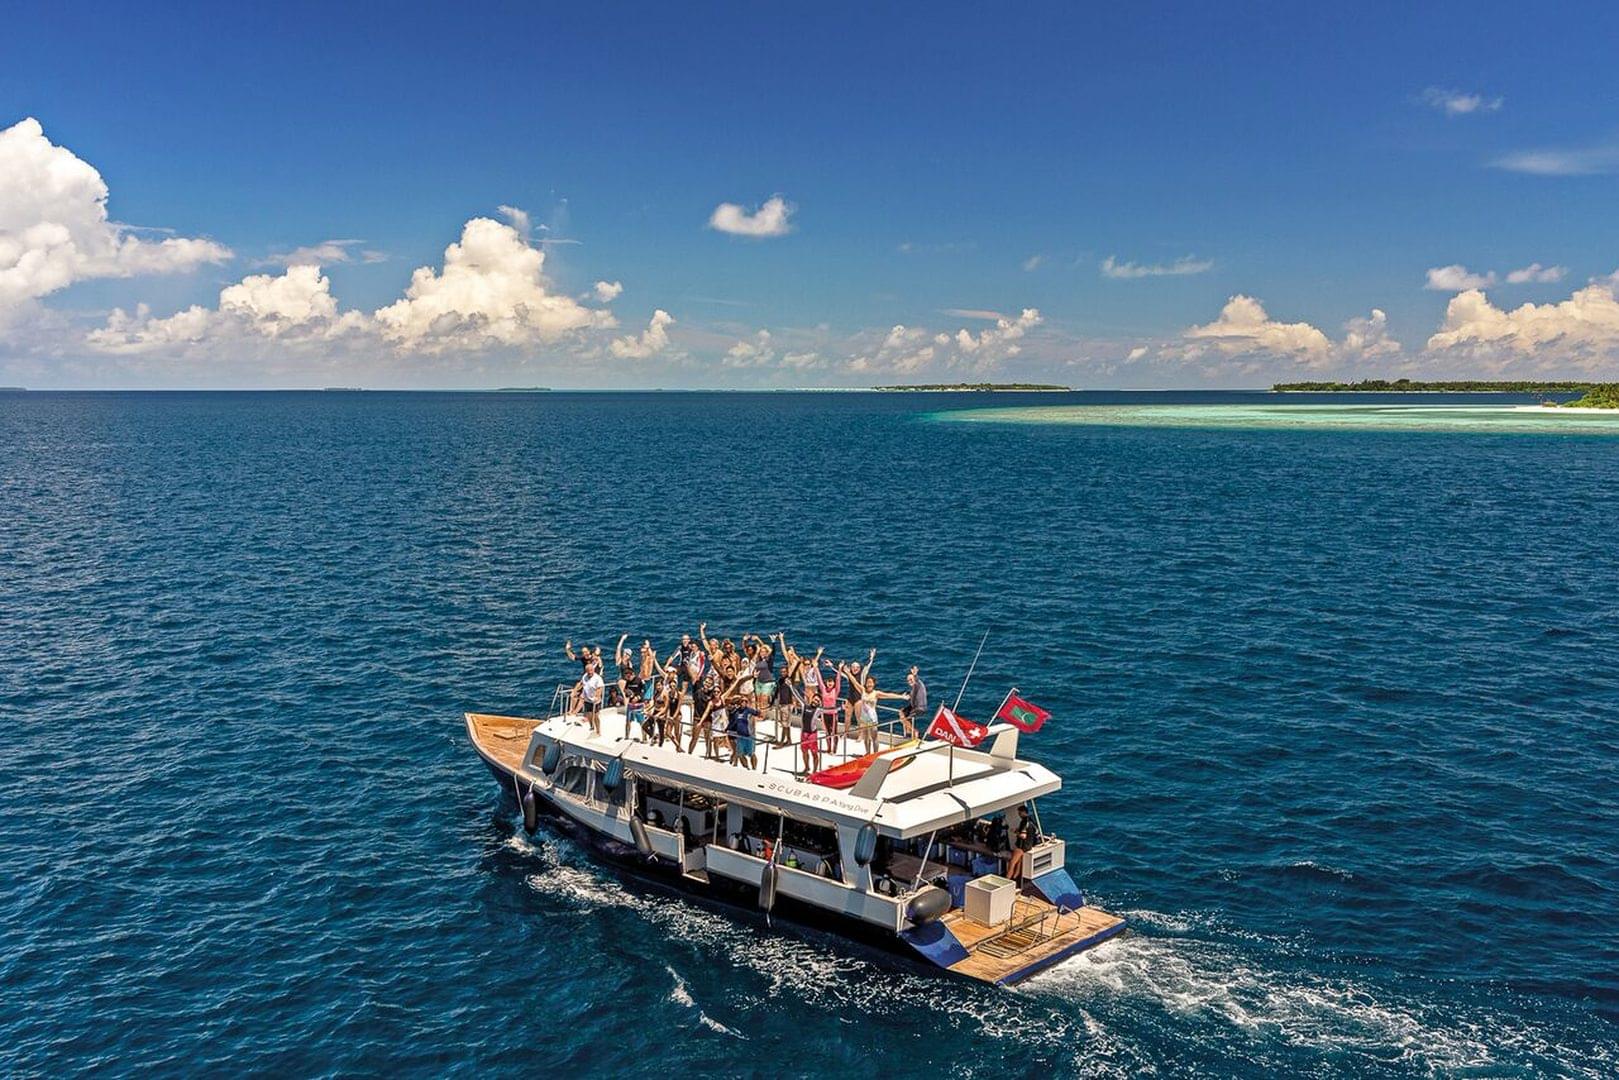 A group of happy scuba divers celebrating together on top of a dhoni boat while on vacation in the Maldives